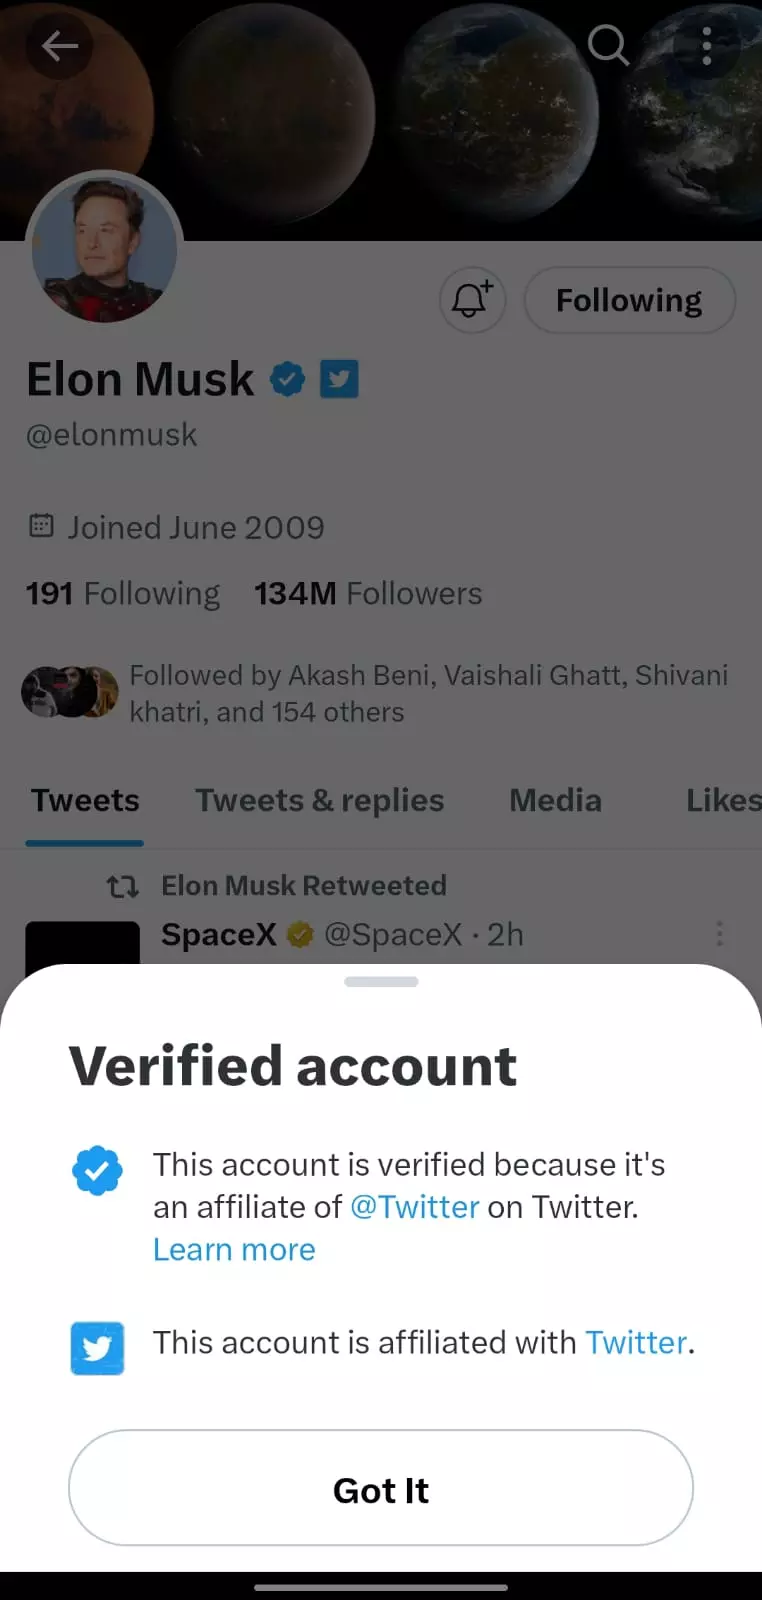 This account is affiliated with Twitter,  Elon Musks affiliate badge read.